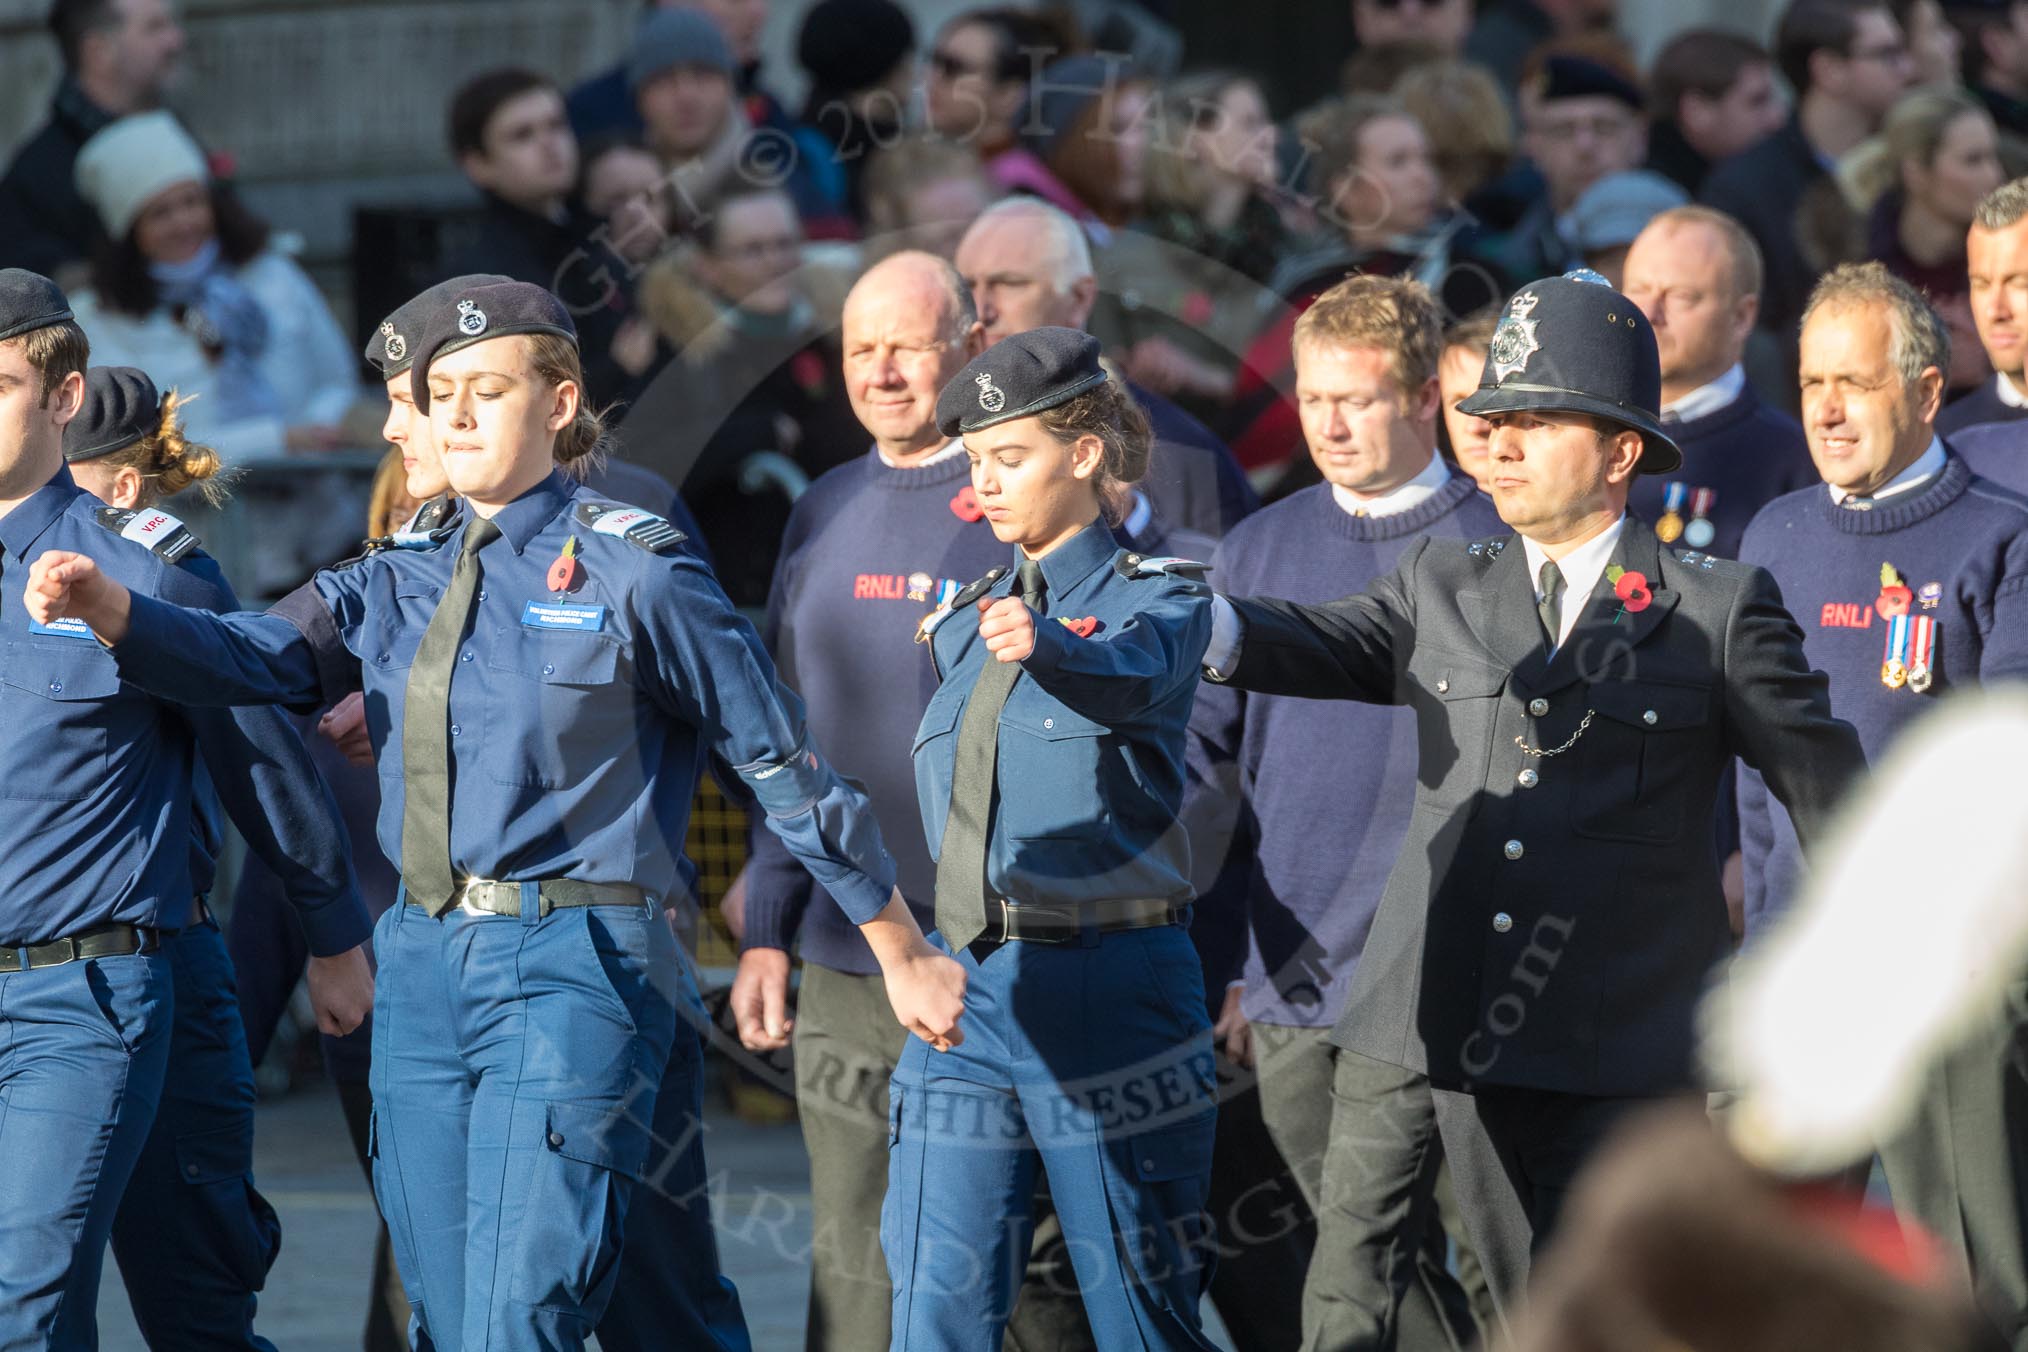 March Past, Remembrance Sunday at the Cenotaph 2016: M41 Royal National Lifeboat Institution.
Cenotaph, Whitehall, London SW1,
London,
Greater London,
United Kingdom,
on 13 November 2016 at 13:19, image #2945